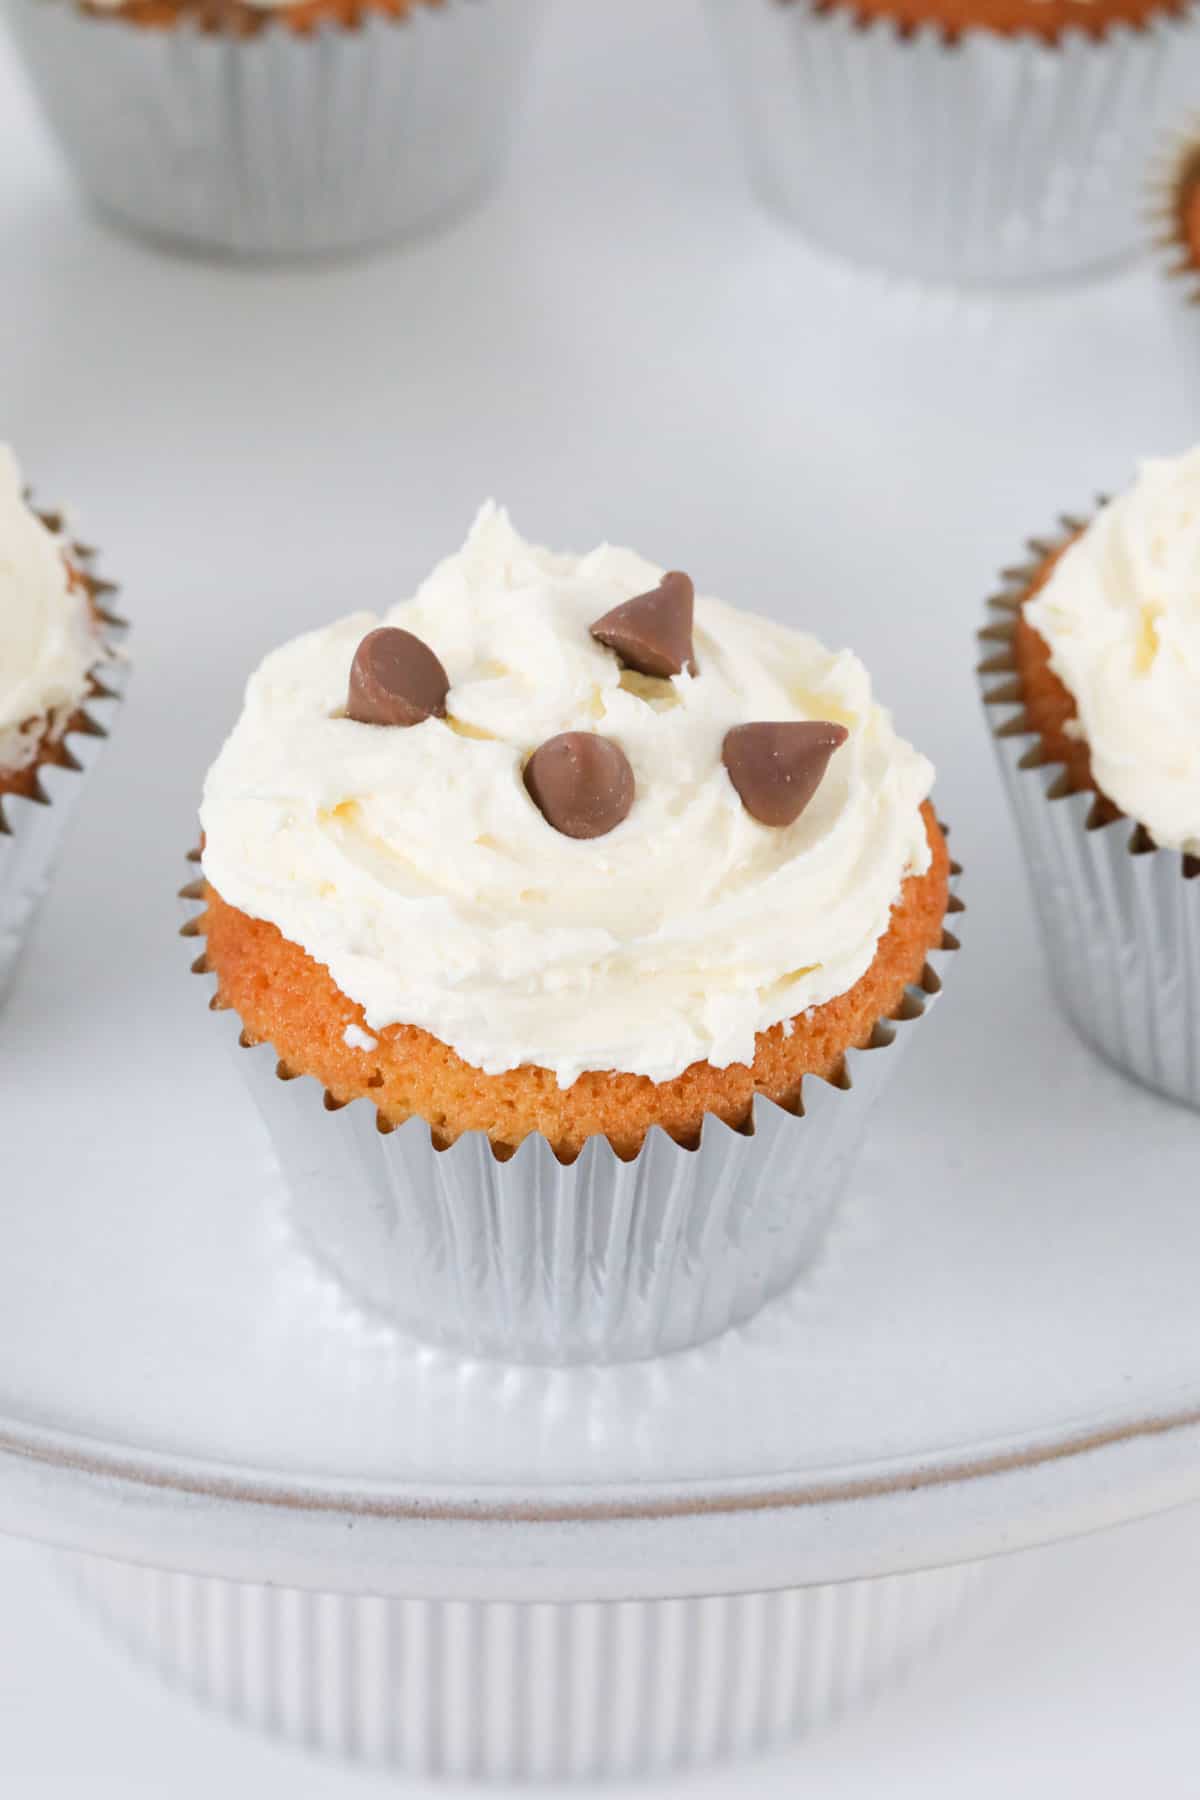 A cupcake topped with frosting and chocolate chips on a cake stand